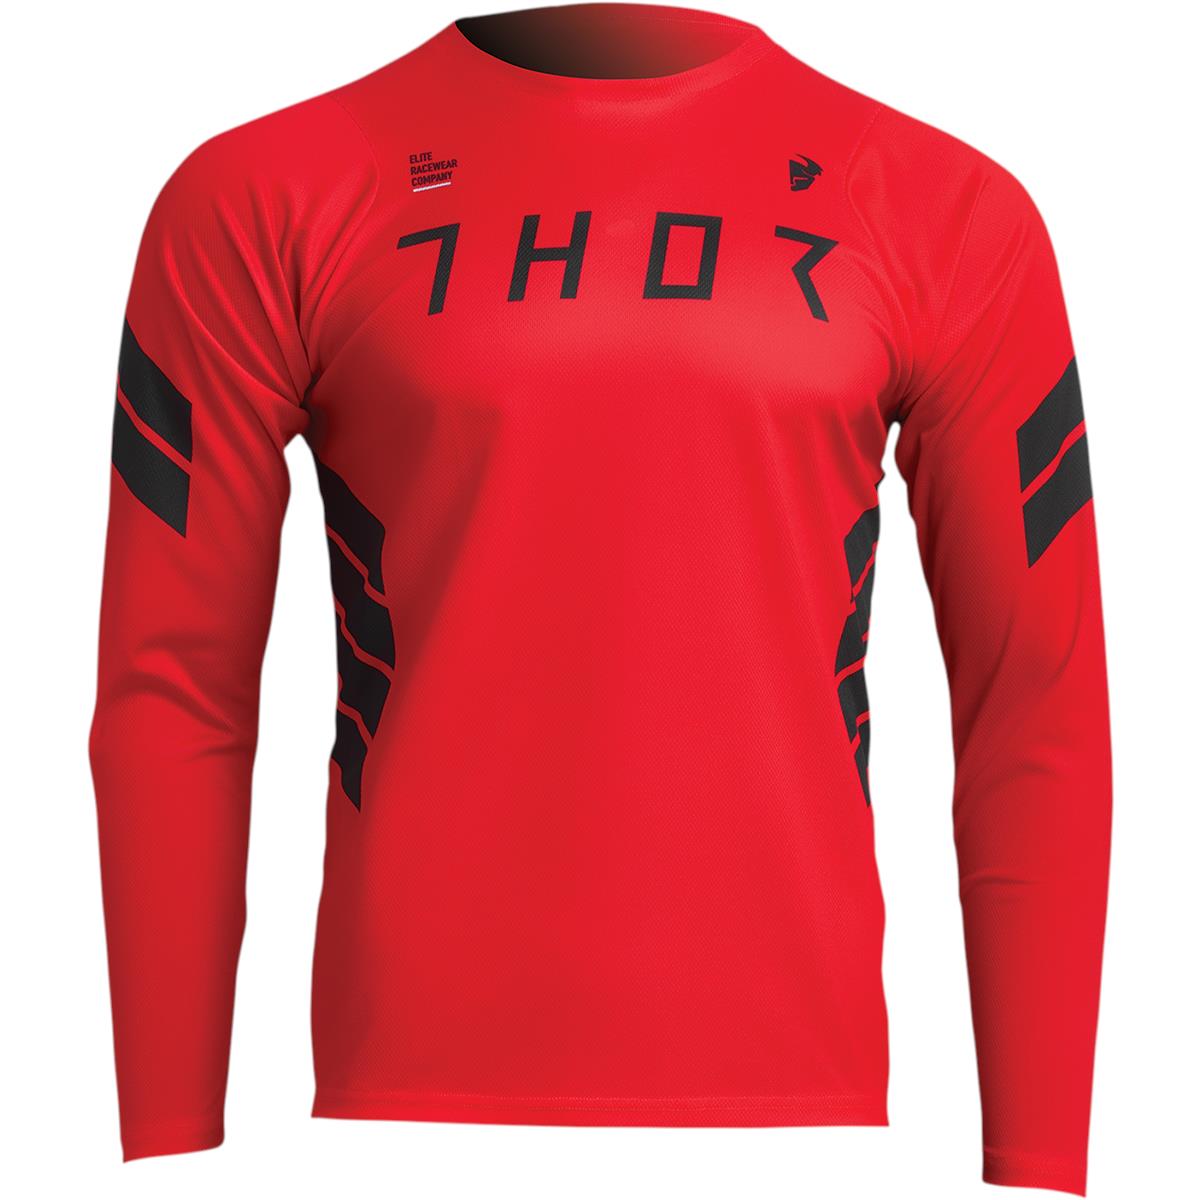 Thor MTB Jersey Long Sleeve Assist Sting - Red/Black